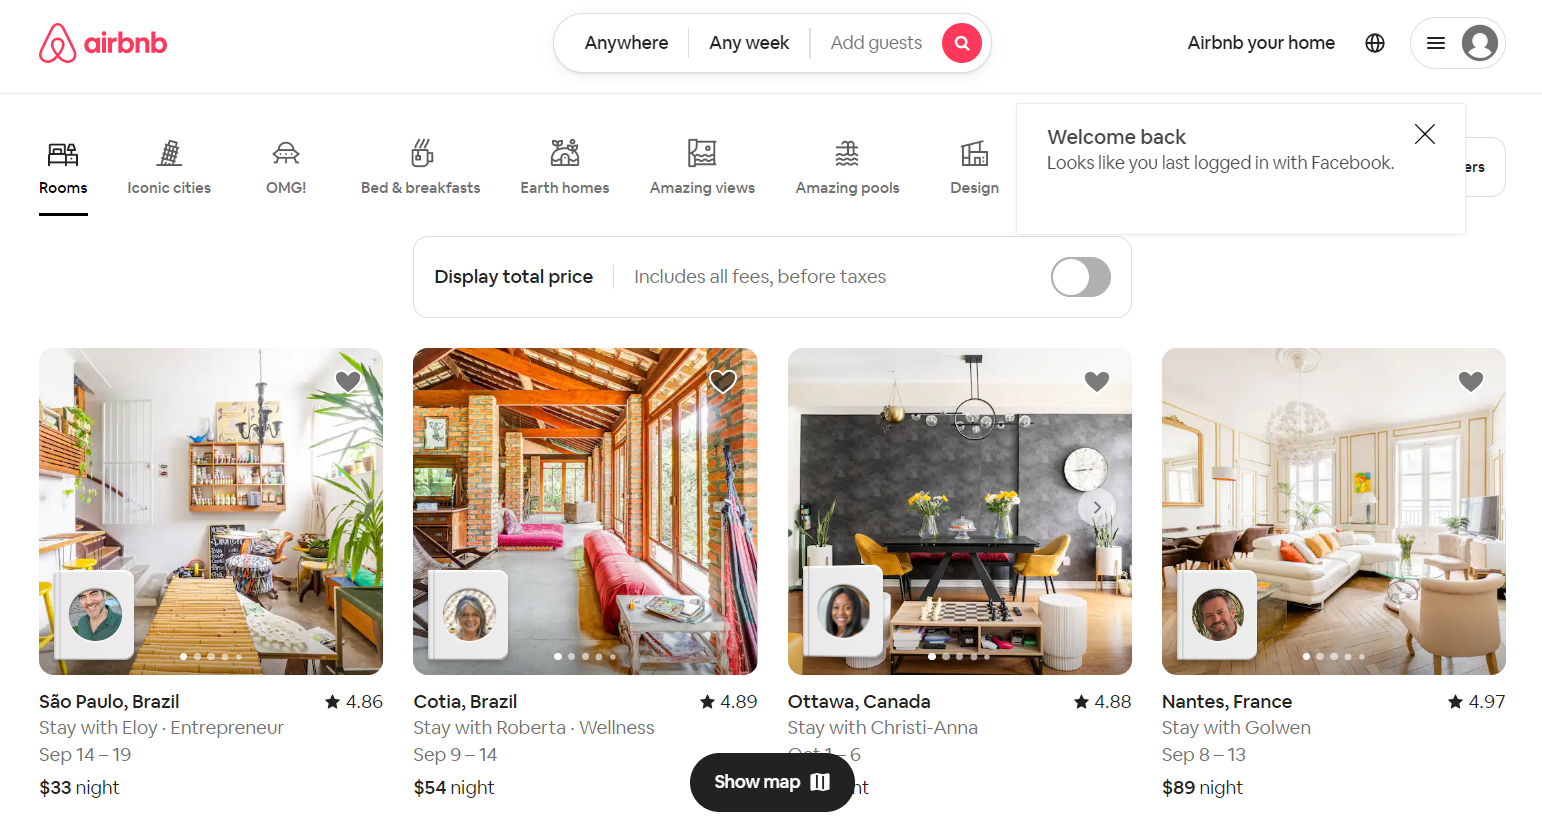 Airbnb uses website personalization to suggest great stays for their users